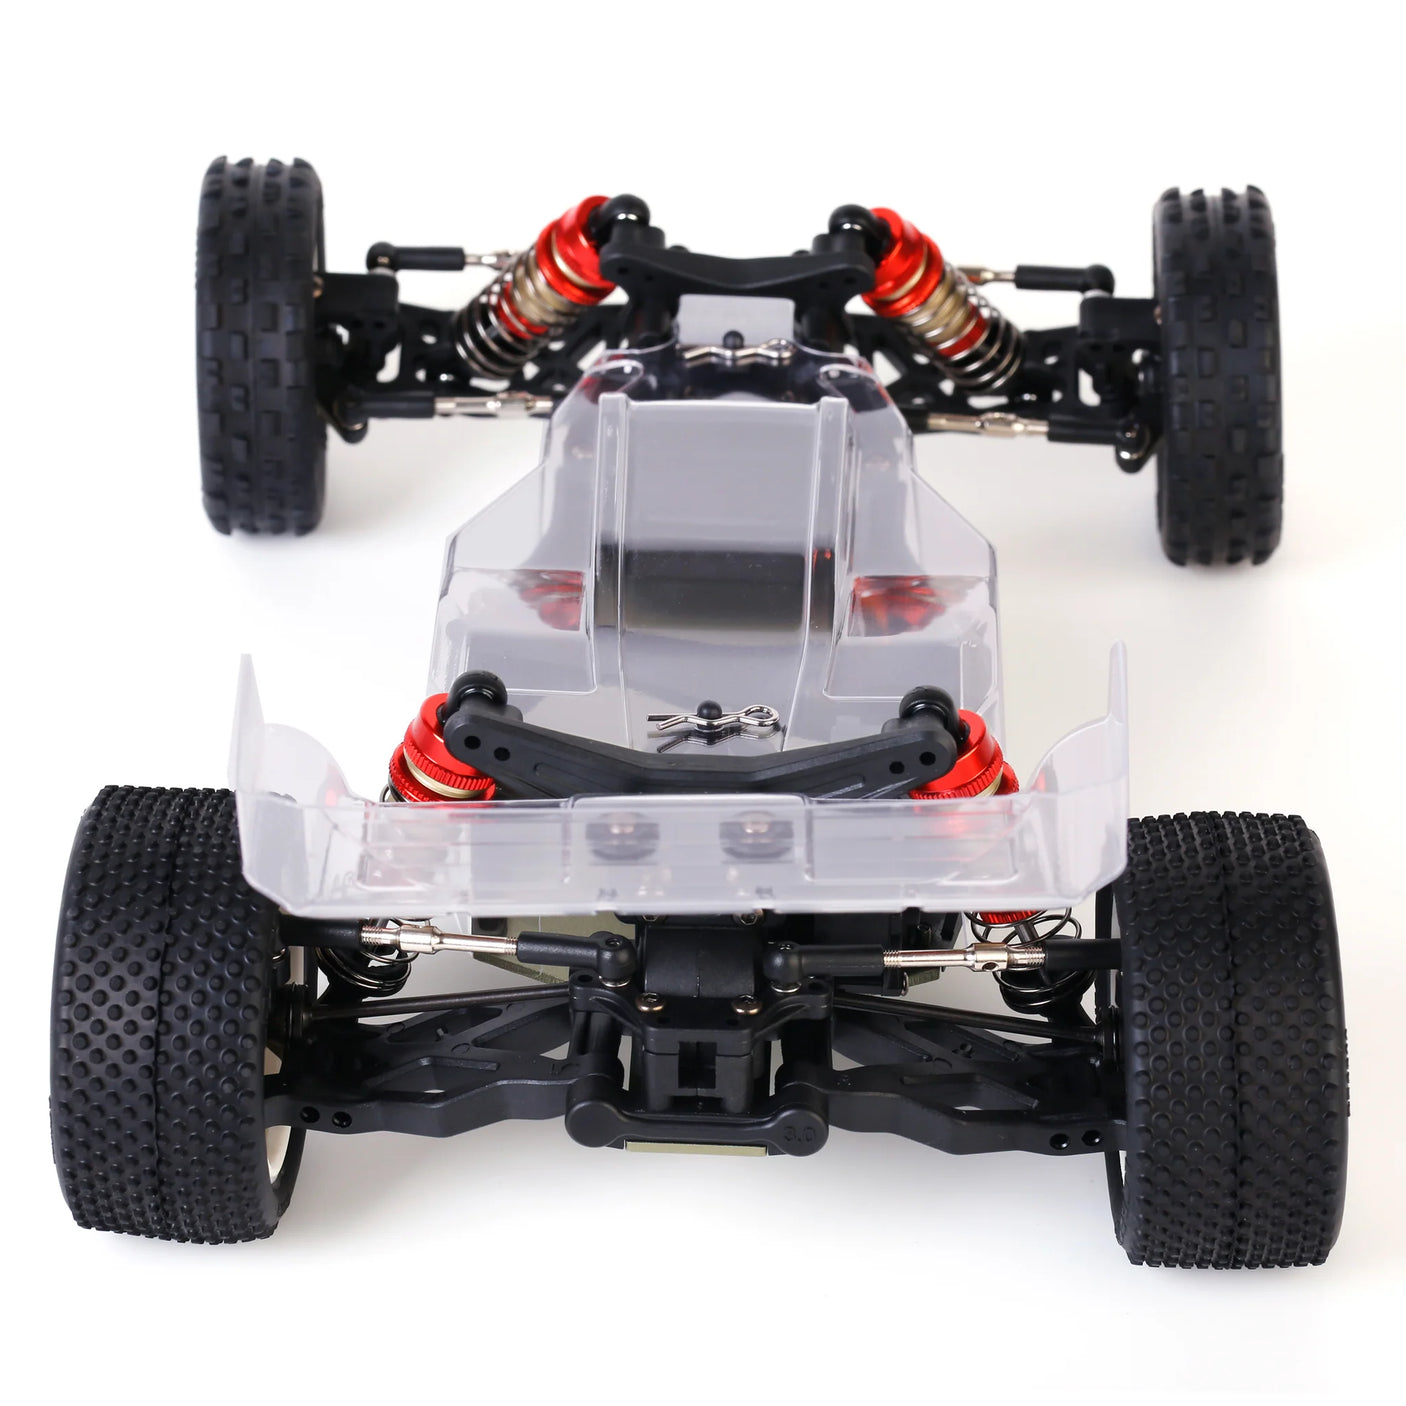 LC Racing: BHC-1 1/14 2WD Buggy Kit – Hobby Addicts